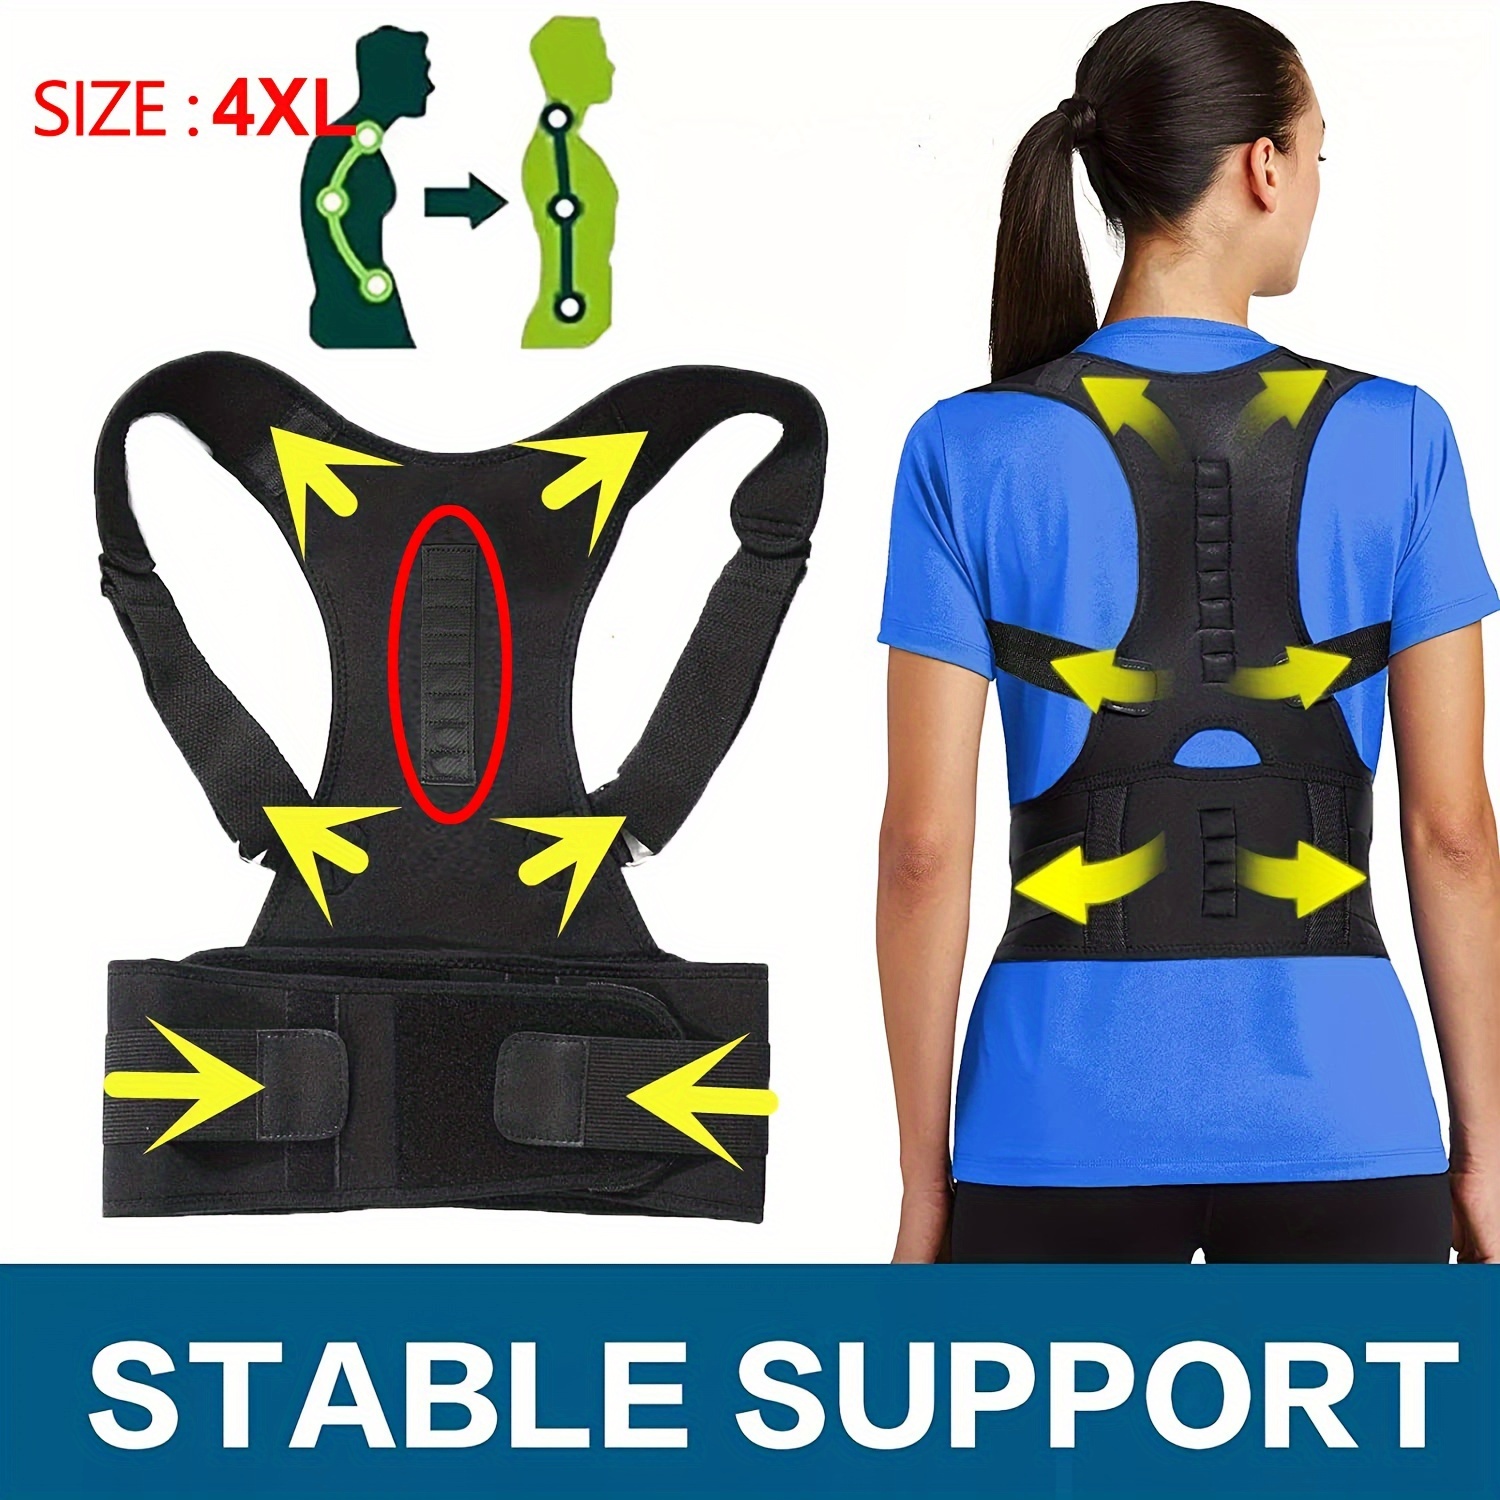 Posture Correction Belt -It Pull ur Round Shoulders Back to Align Your  Spine the Way it Should be.